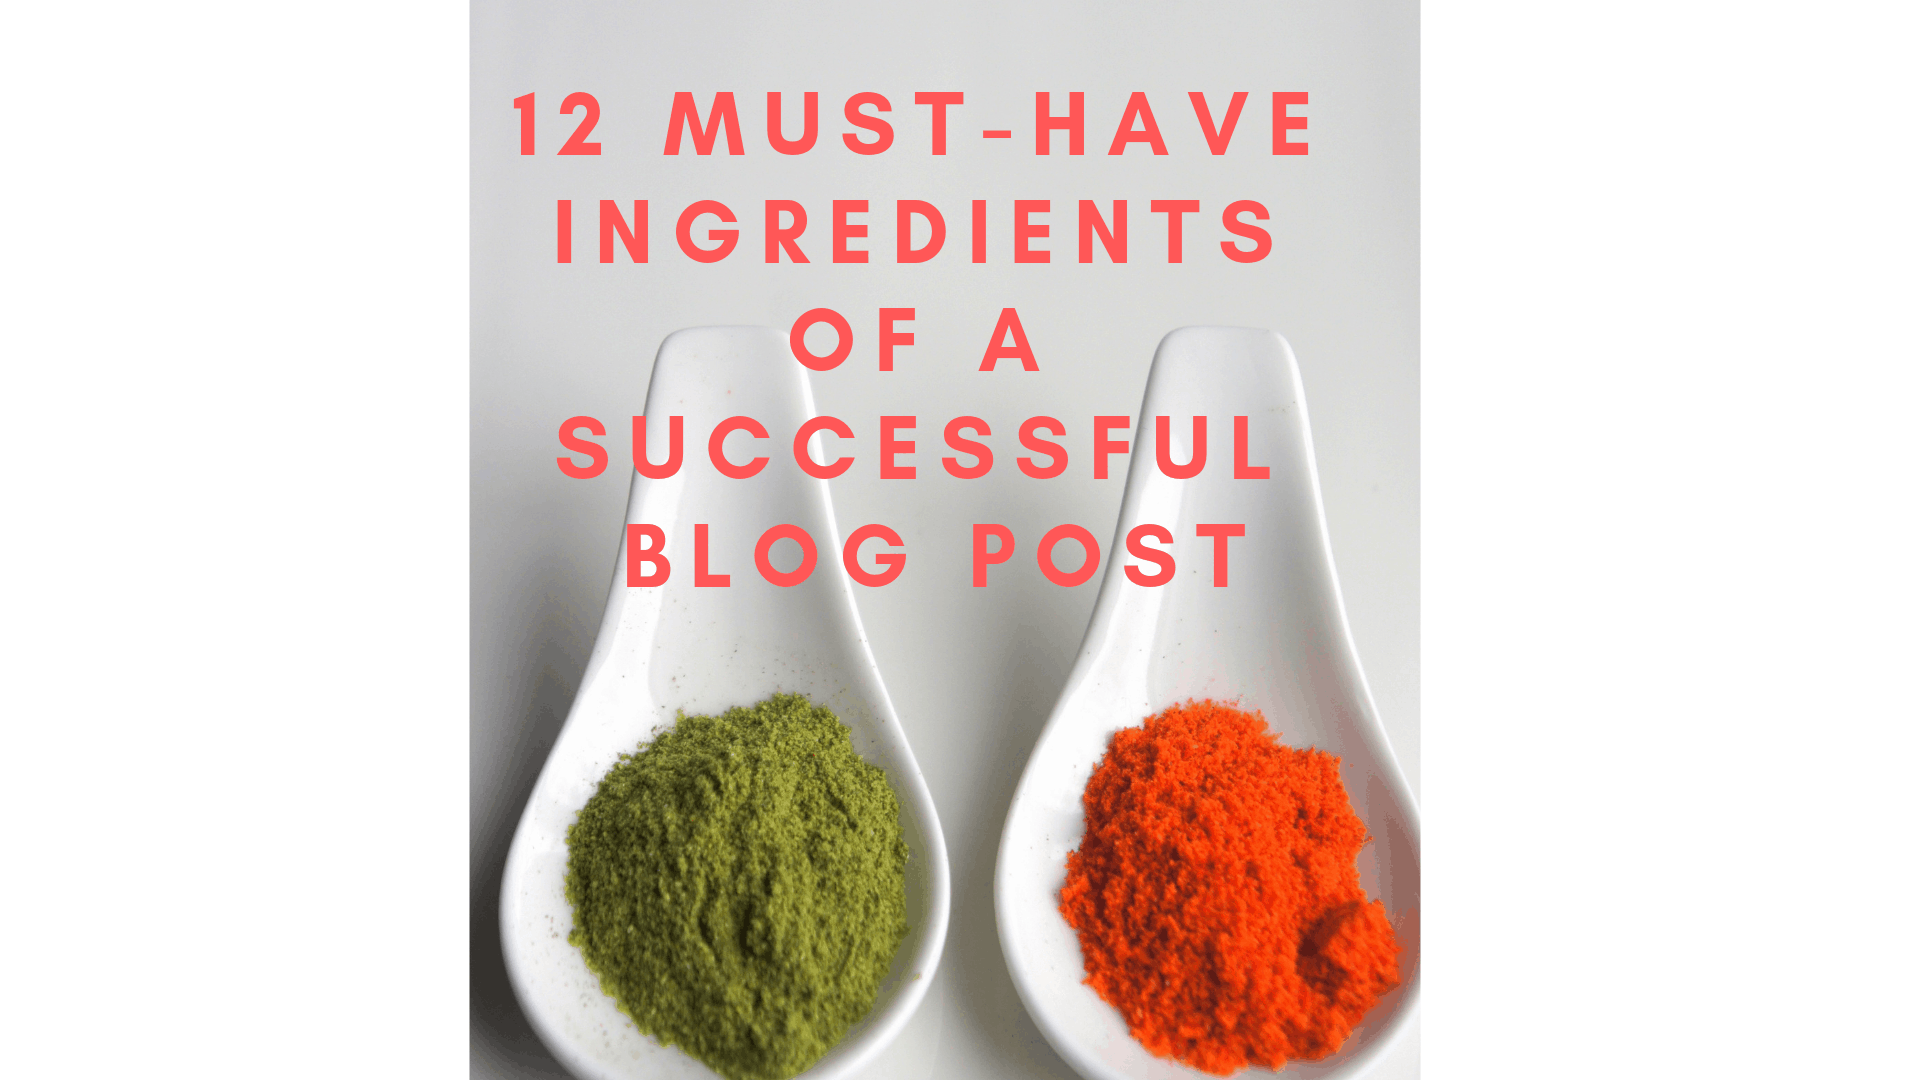 12 Must-Have Ingredients of a Successful Blog Post